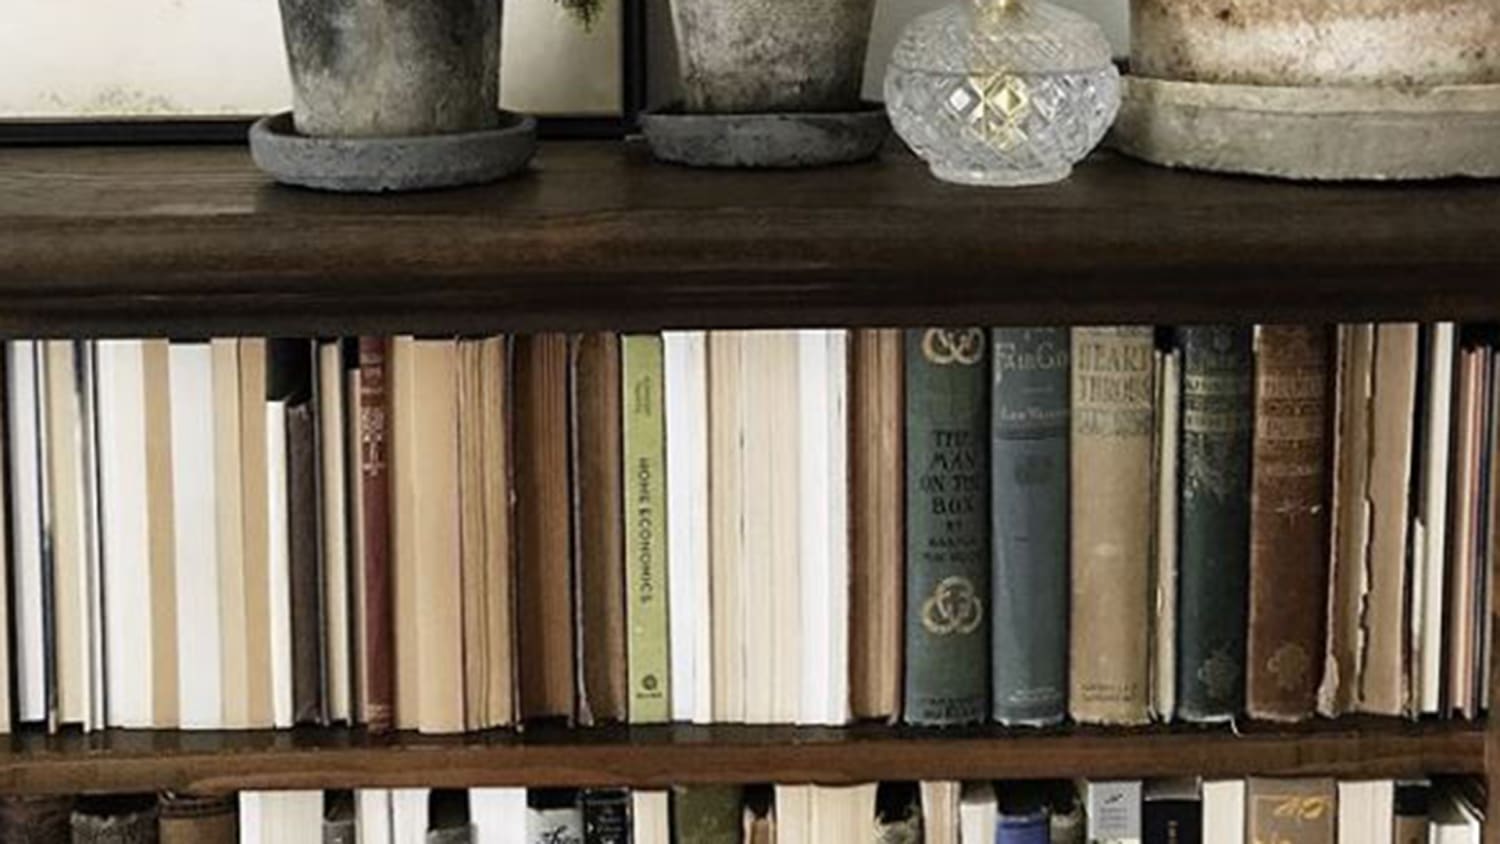 Backward Books On Shelves Is A Controversial Home Decor Trend